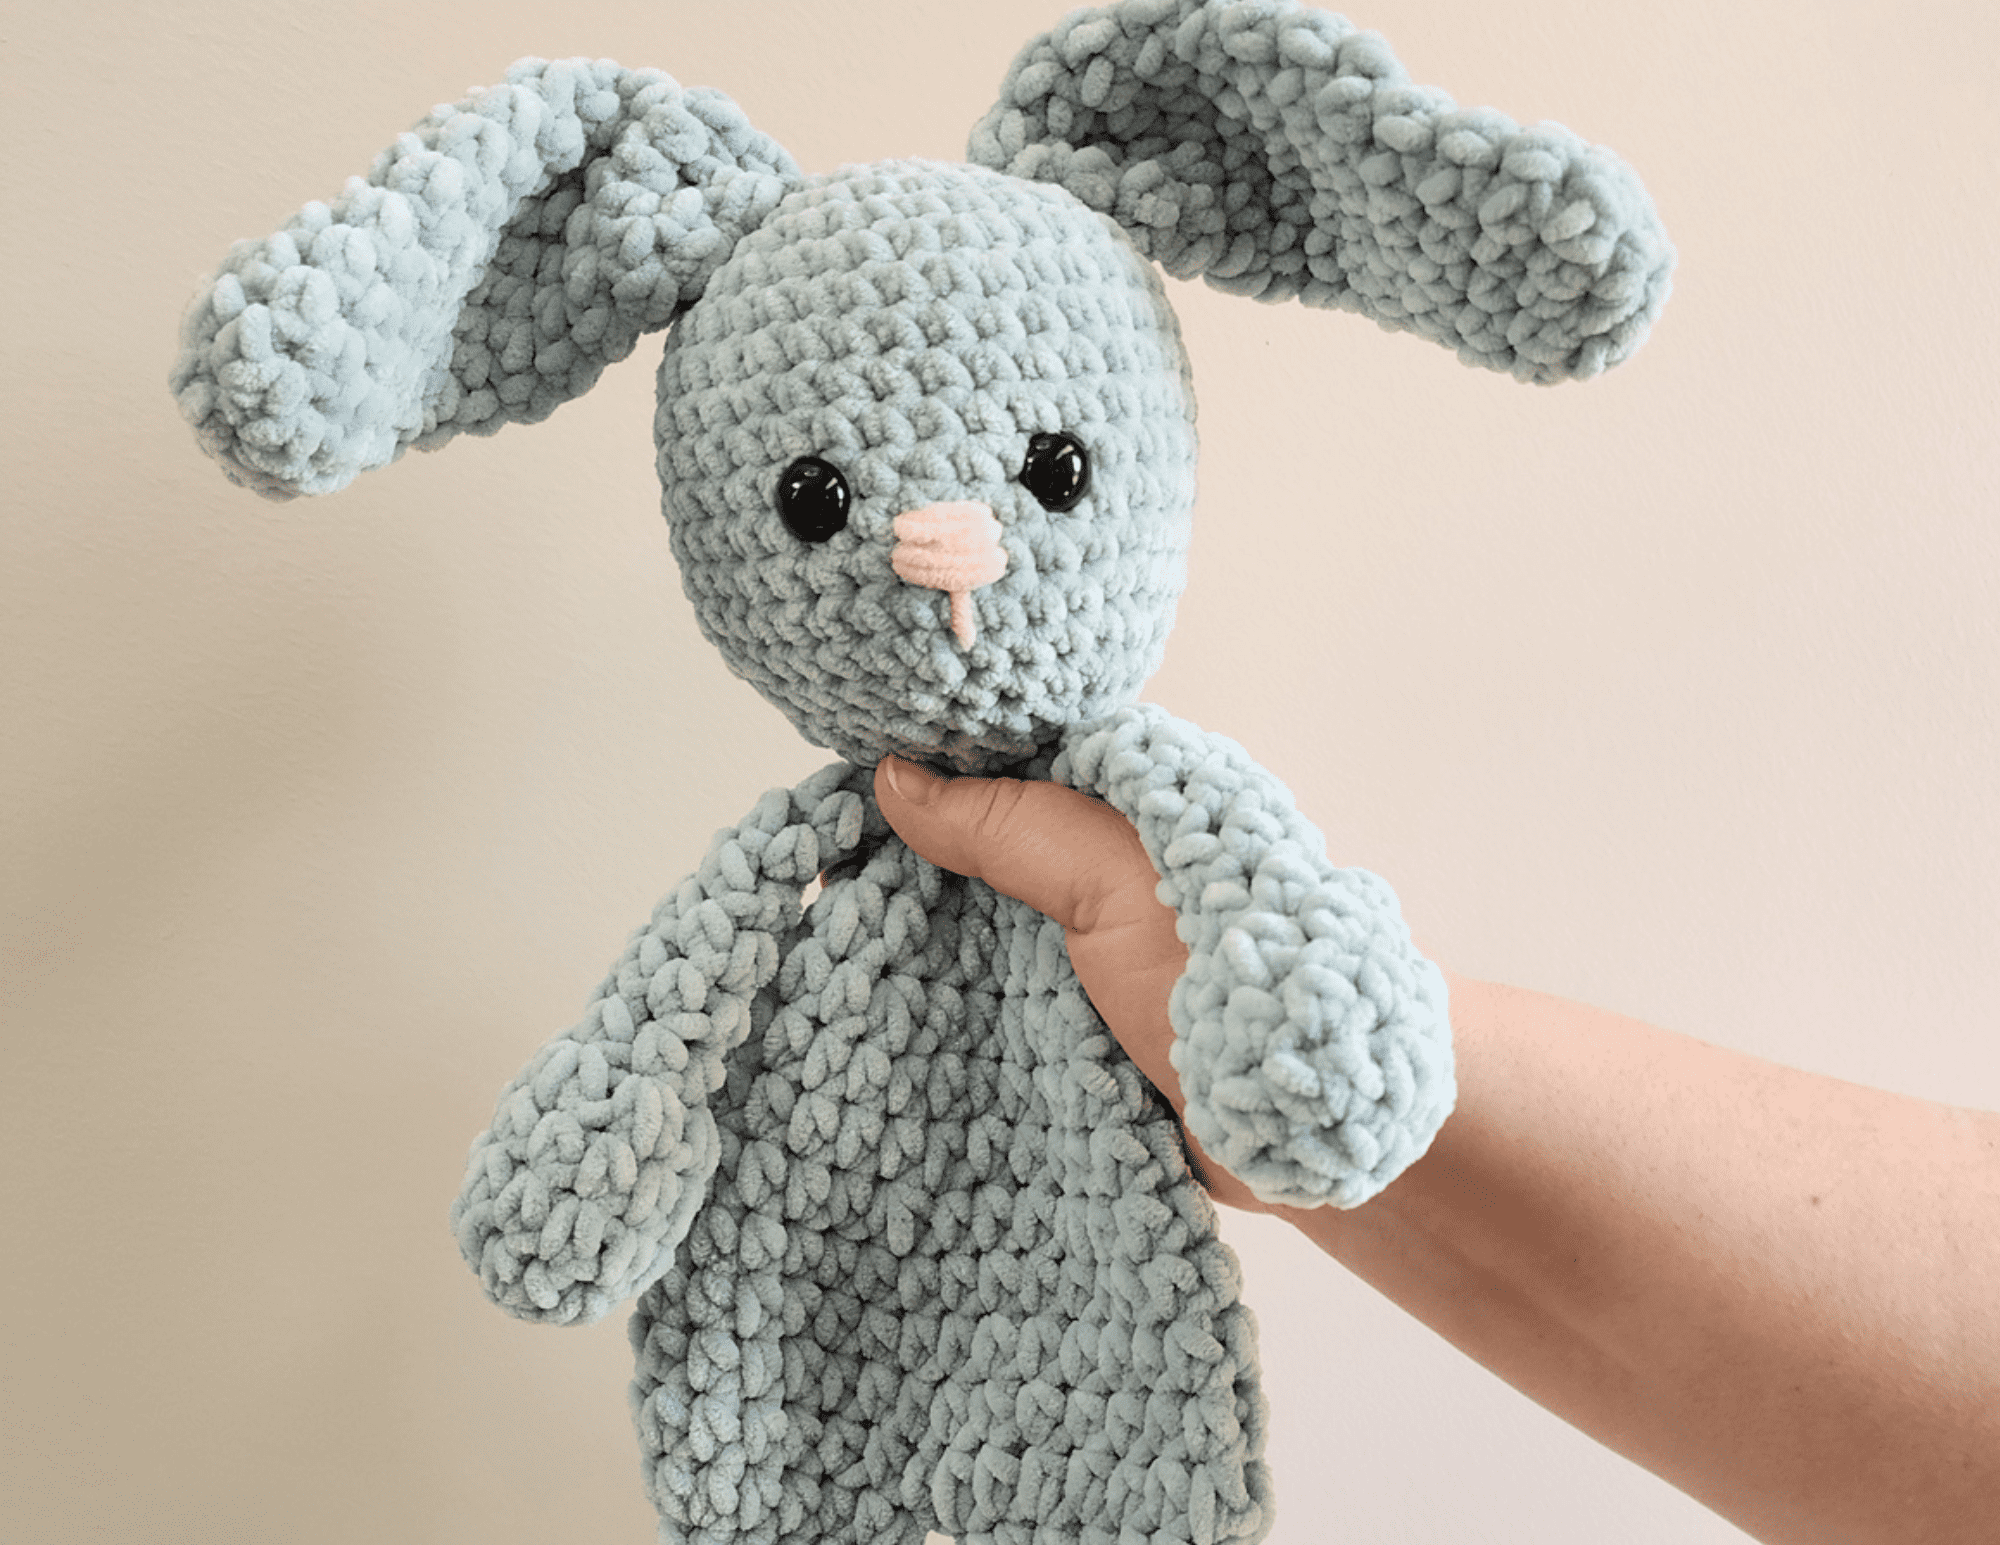 Soft Amigurumi Yarn for Crocheting with Easy-To-See Stitches